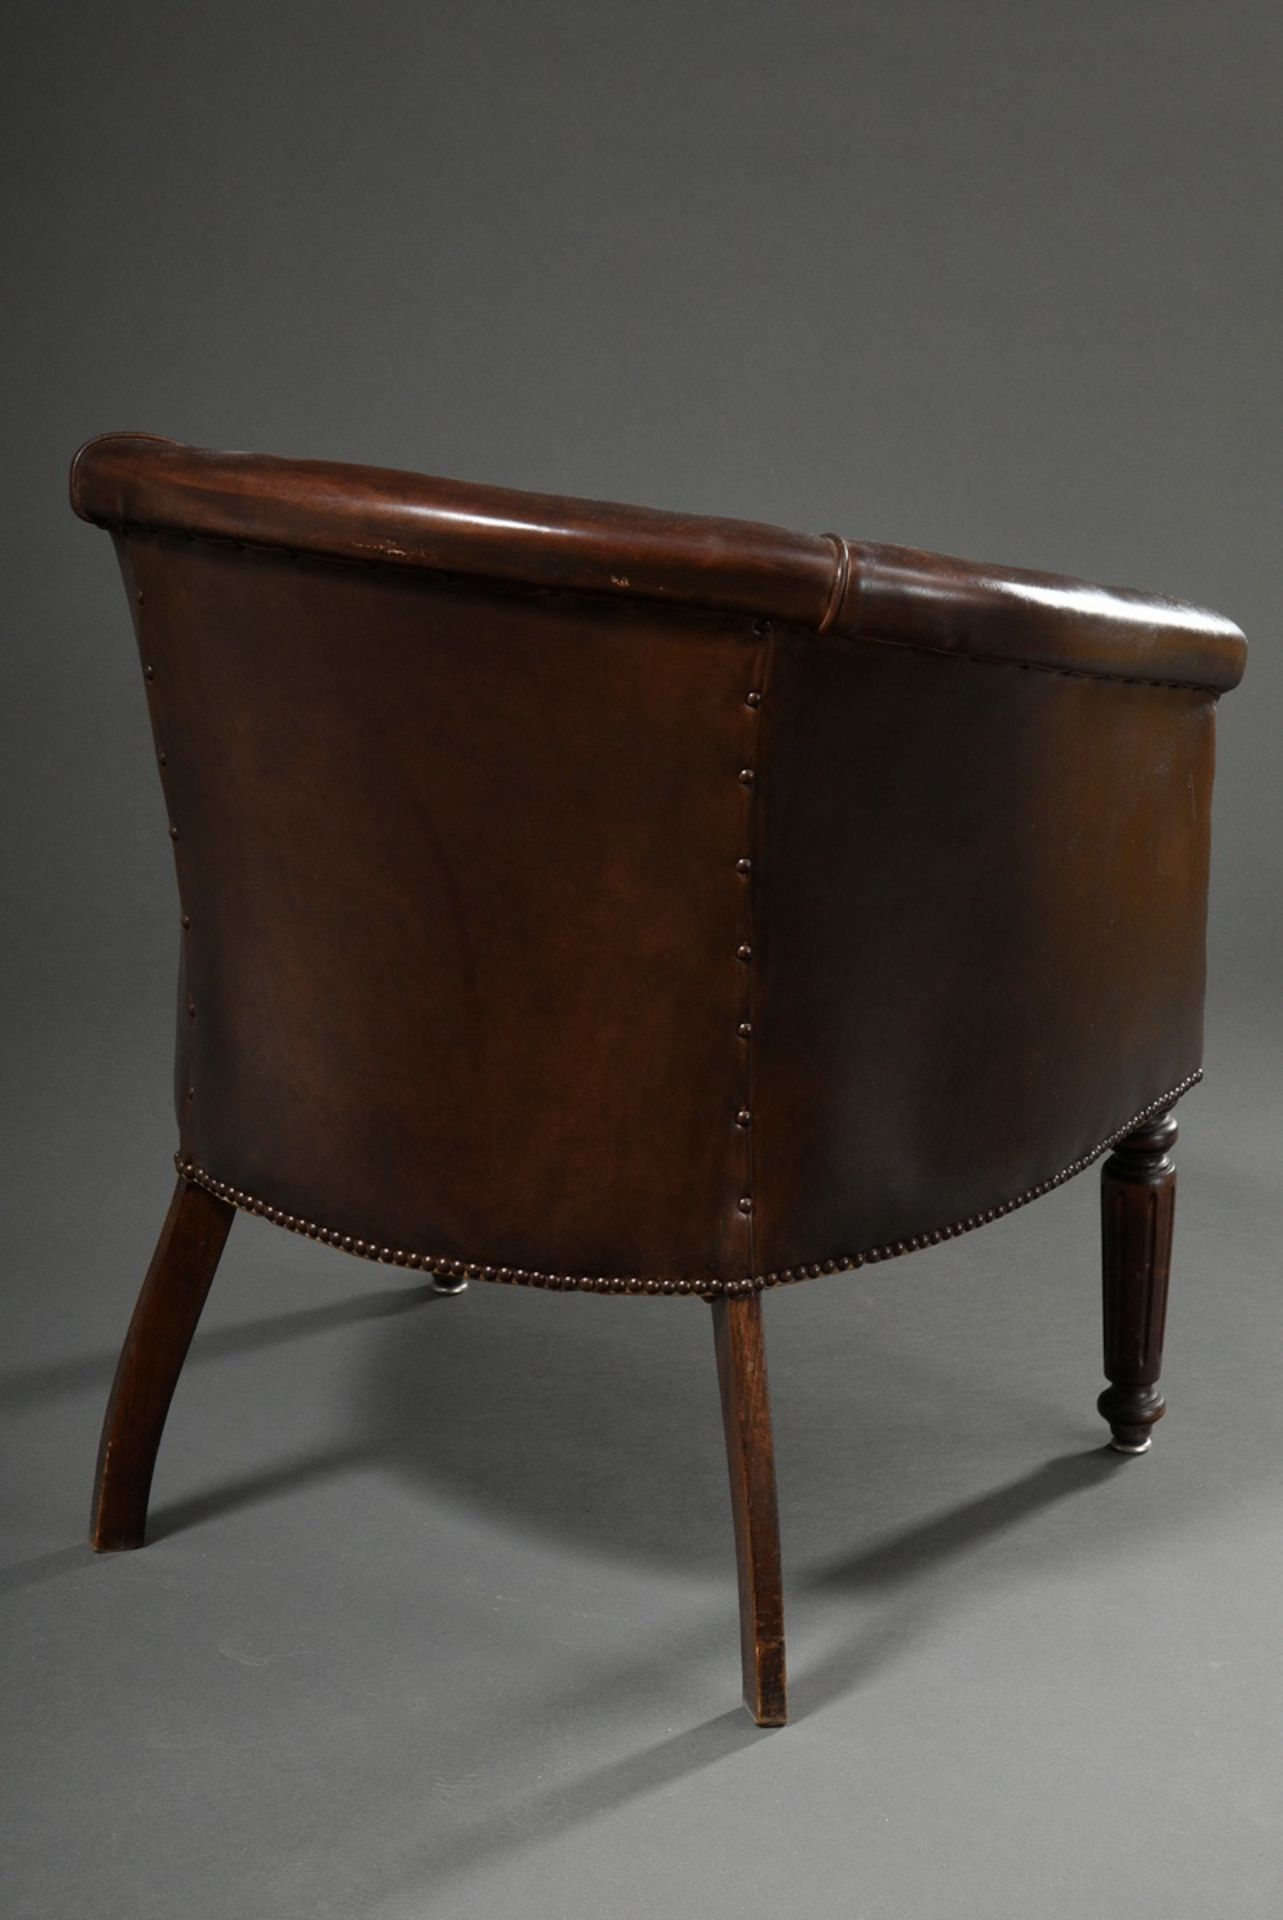 Dark brown leather club armchair with semi-circular backrest and fluted front legs, removable cushi - Image 2 of 3